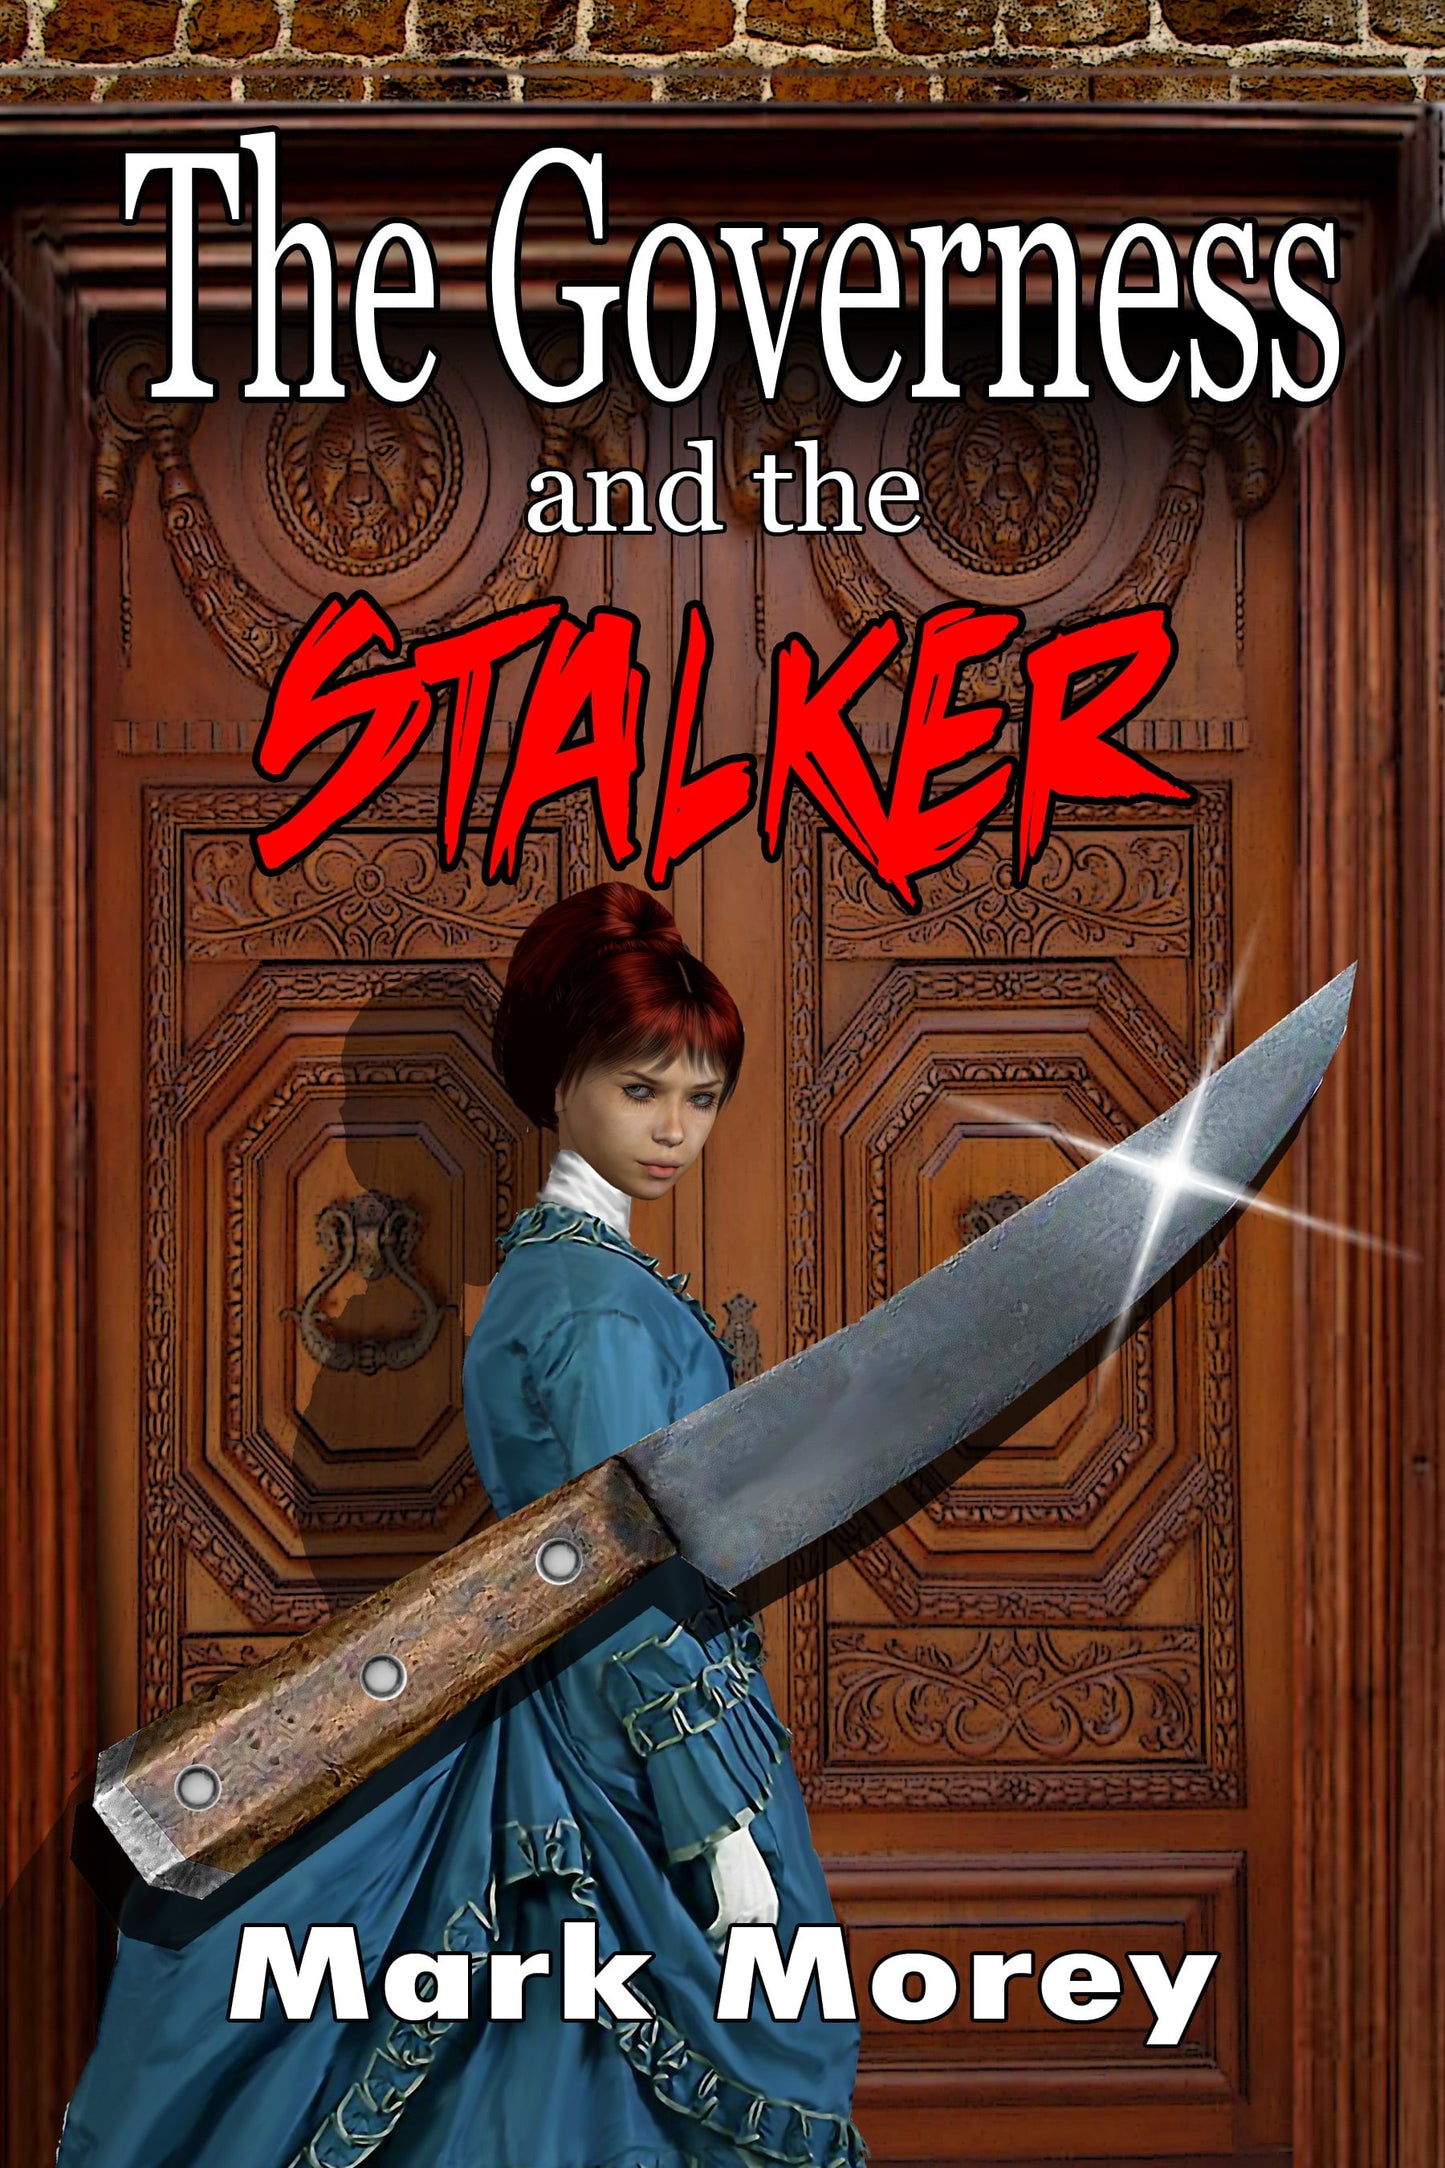 The Governess and the Stalker